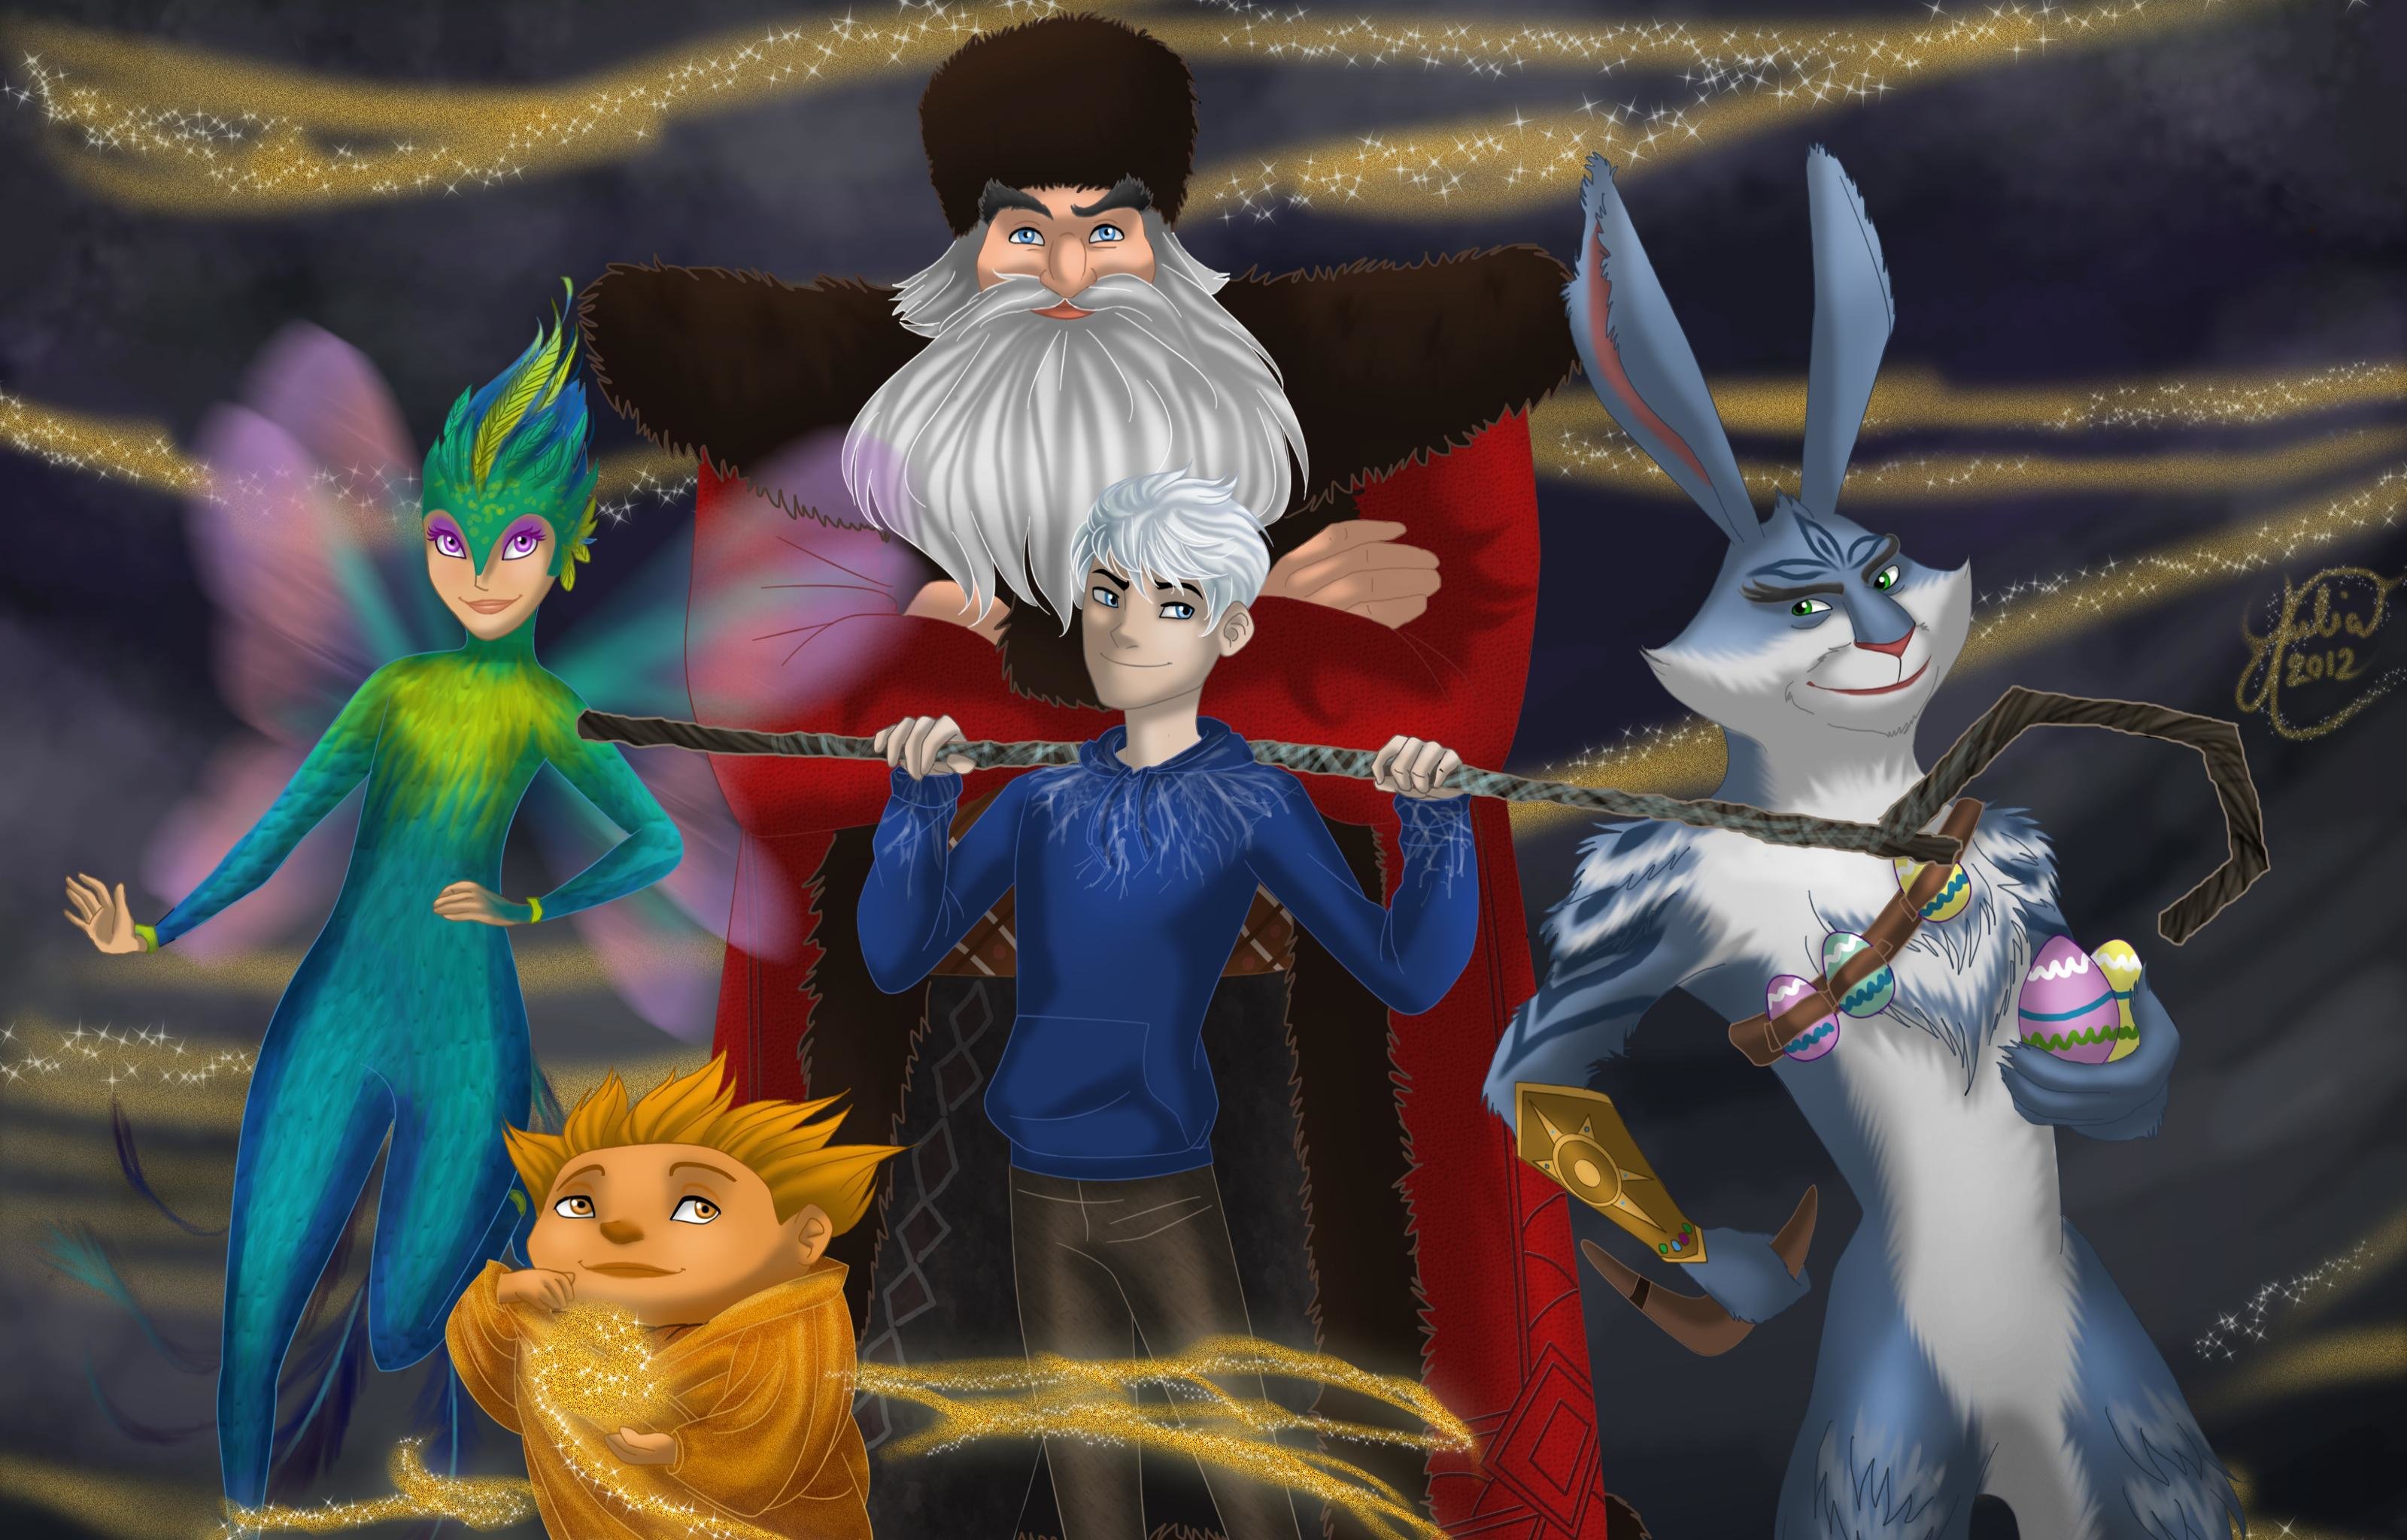 Rise Of The Guardians wallpaper ID:174792 for hd 3200x2048 PC.